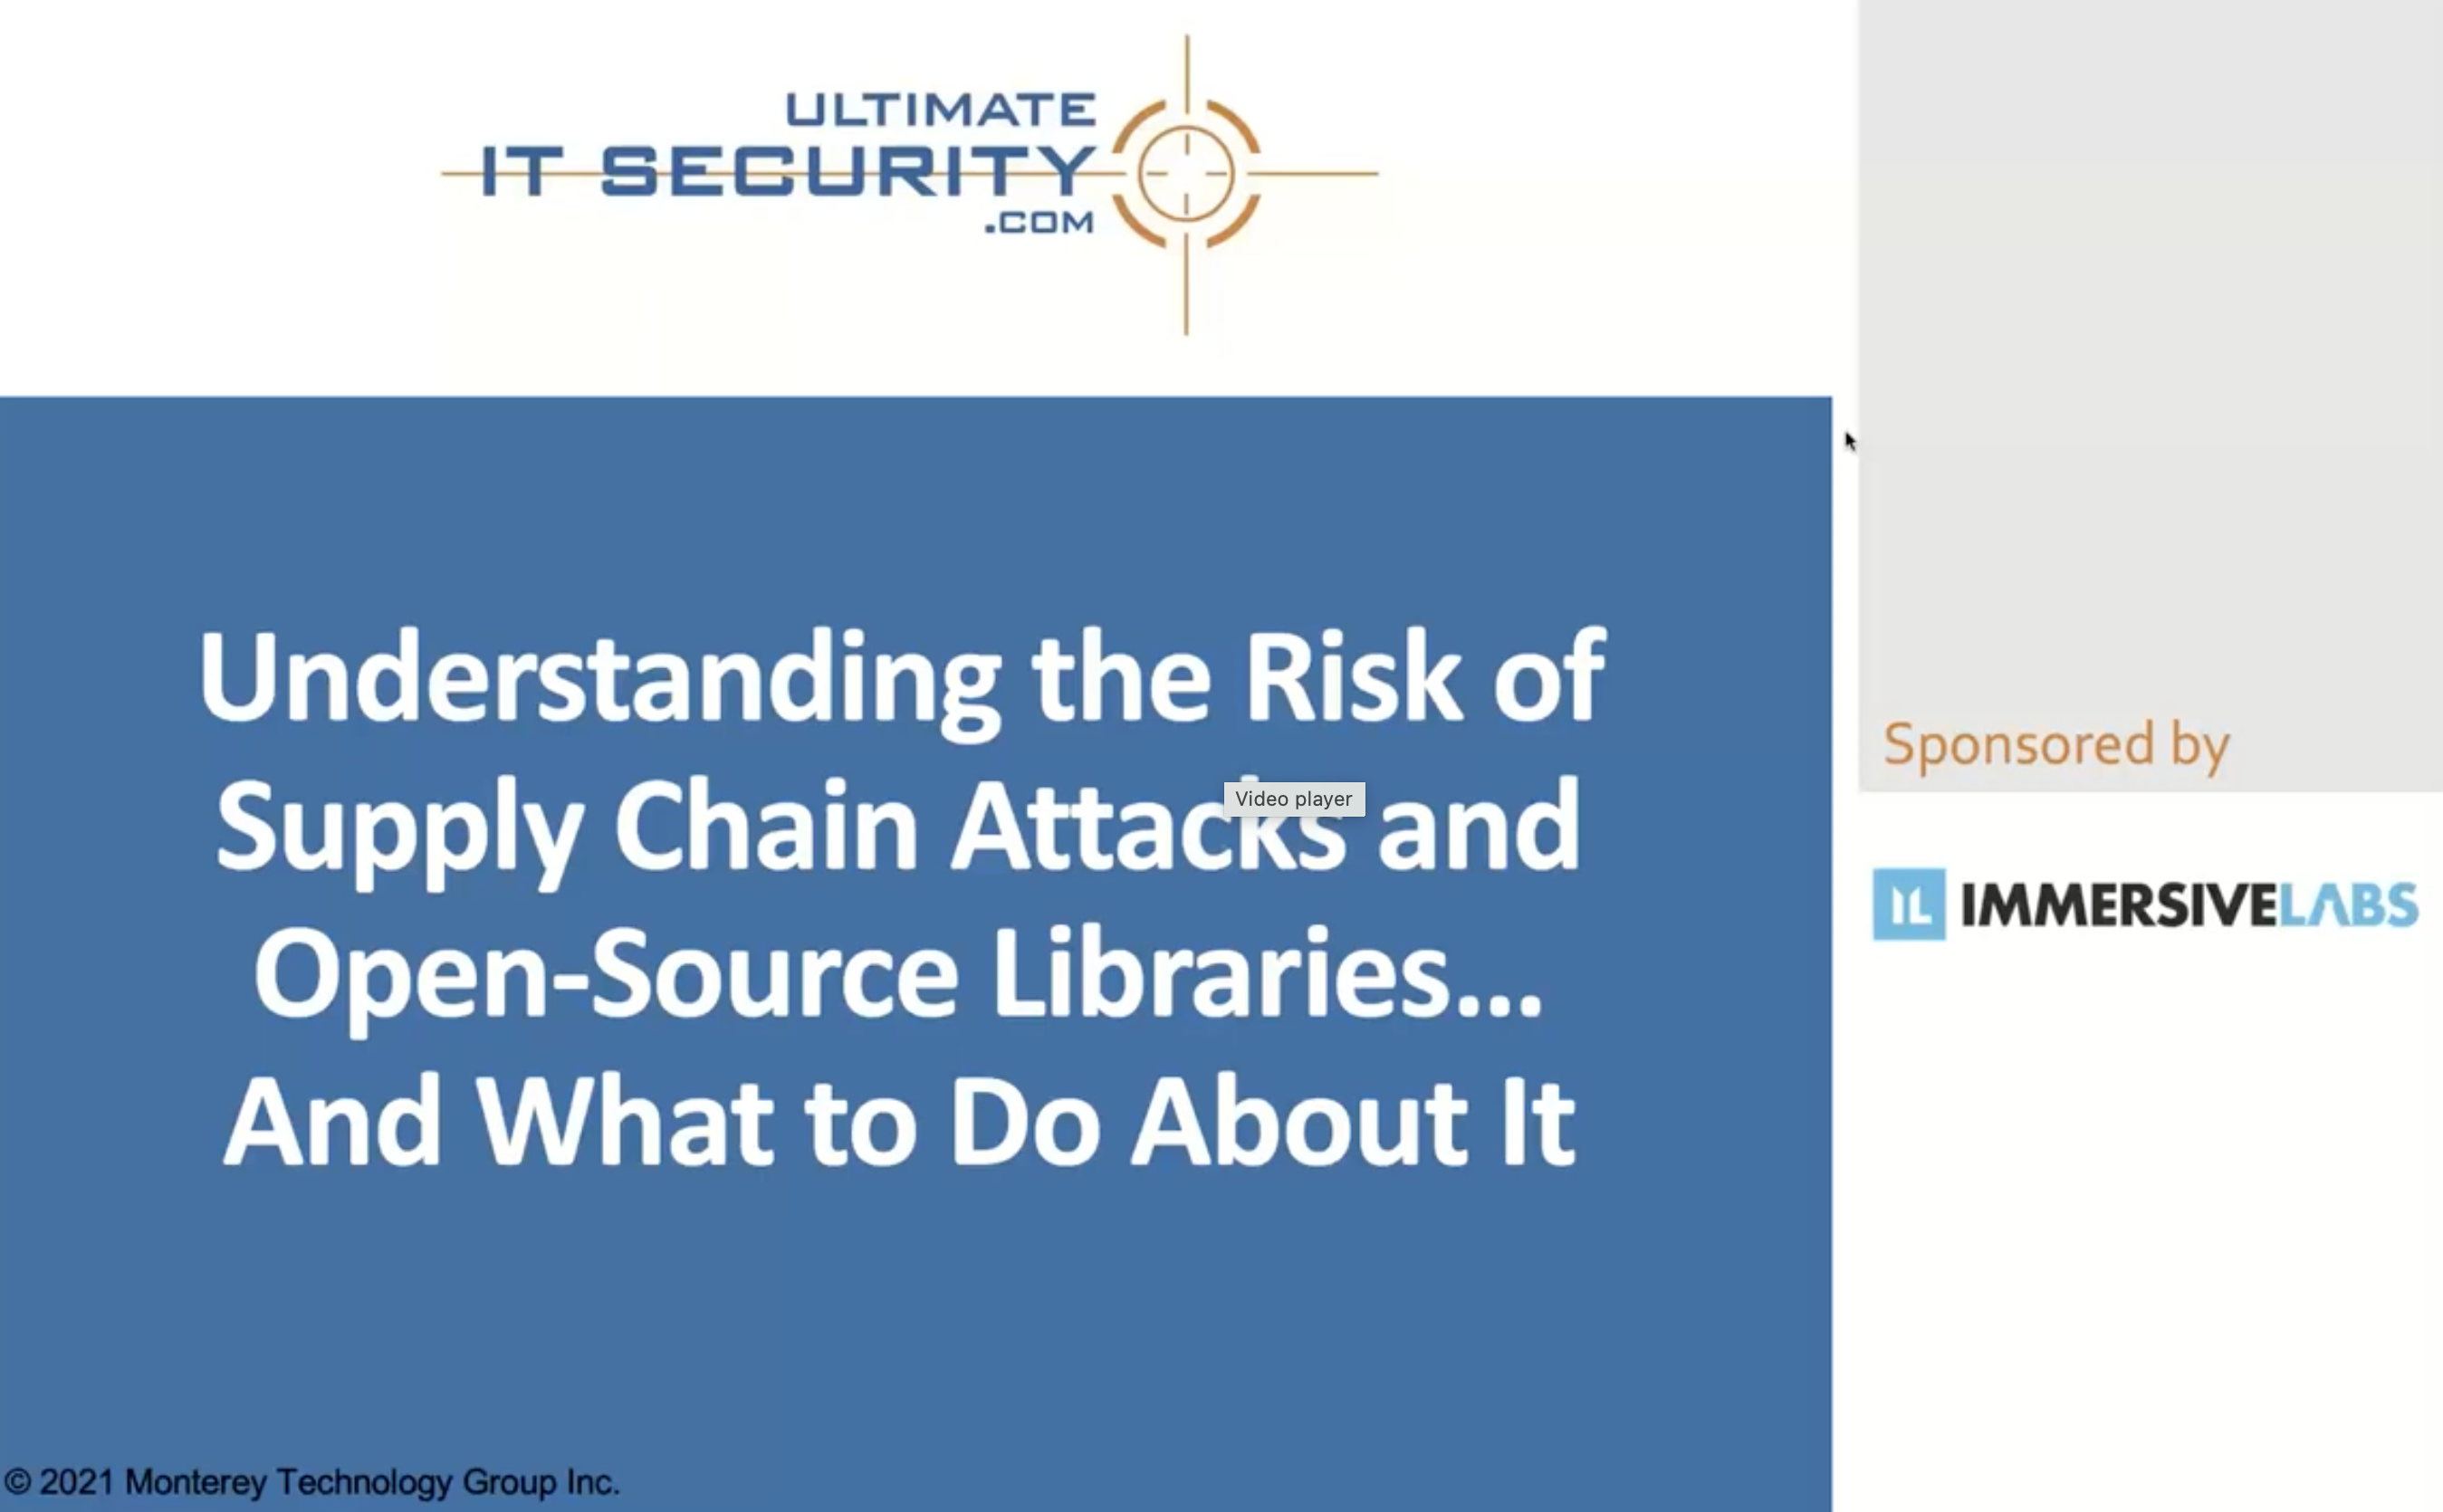 Understanding the Risk of Supply Chain Attacks - and what to do about them